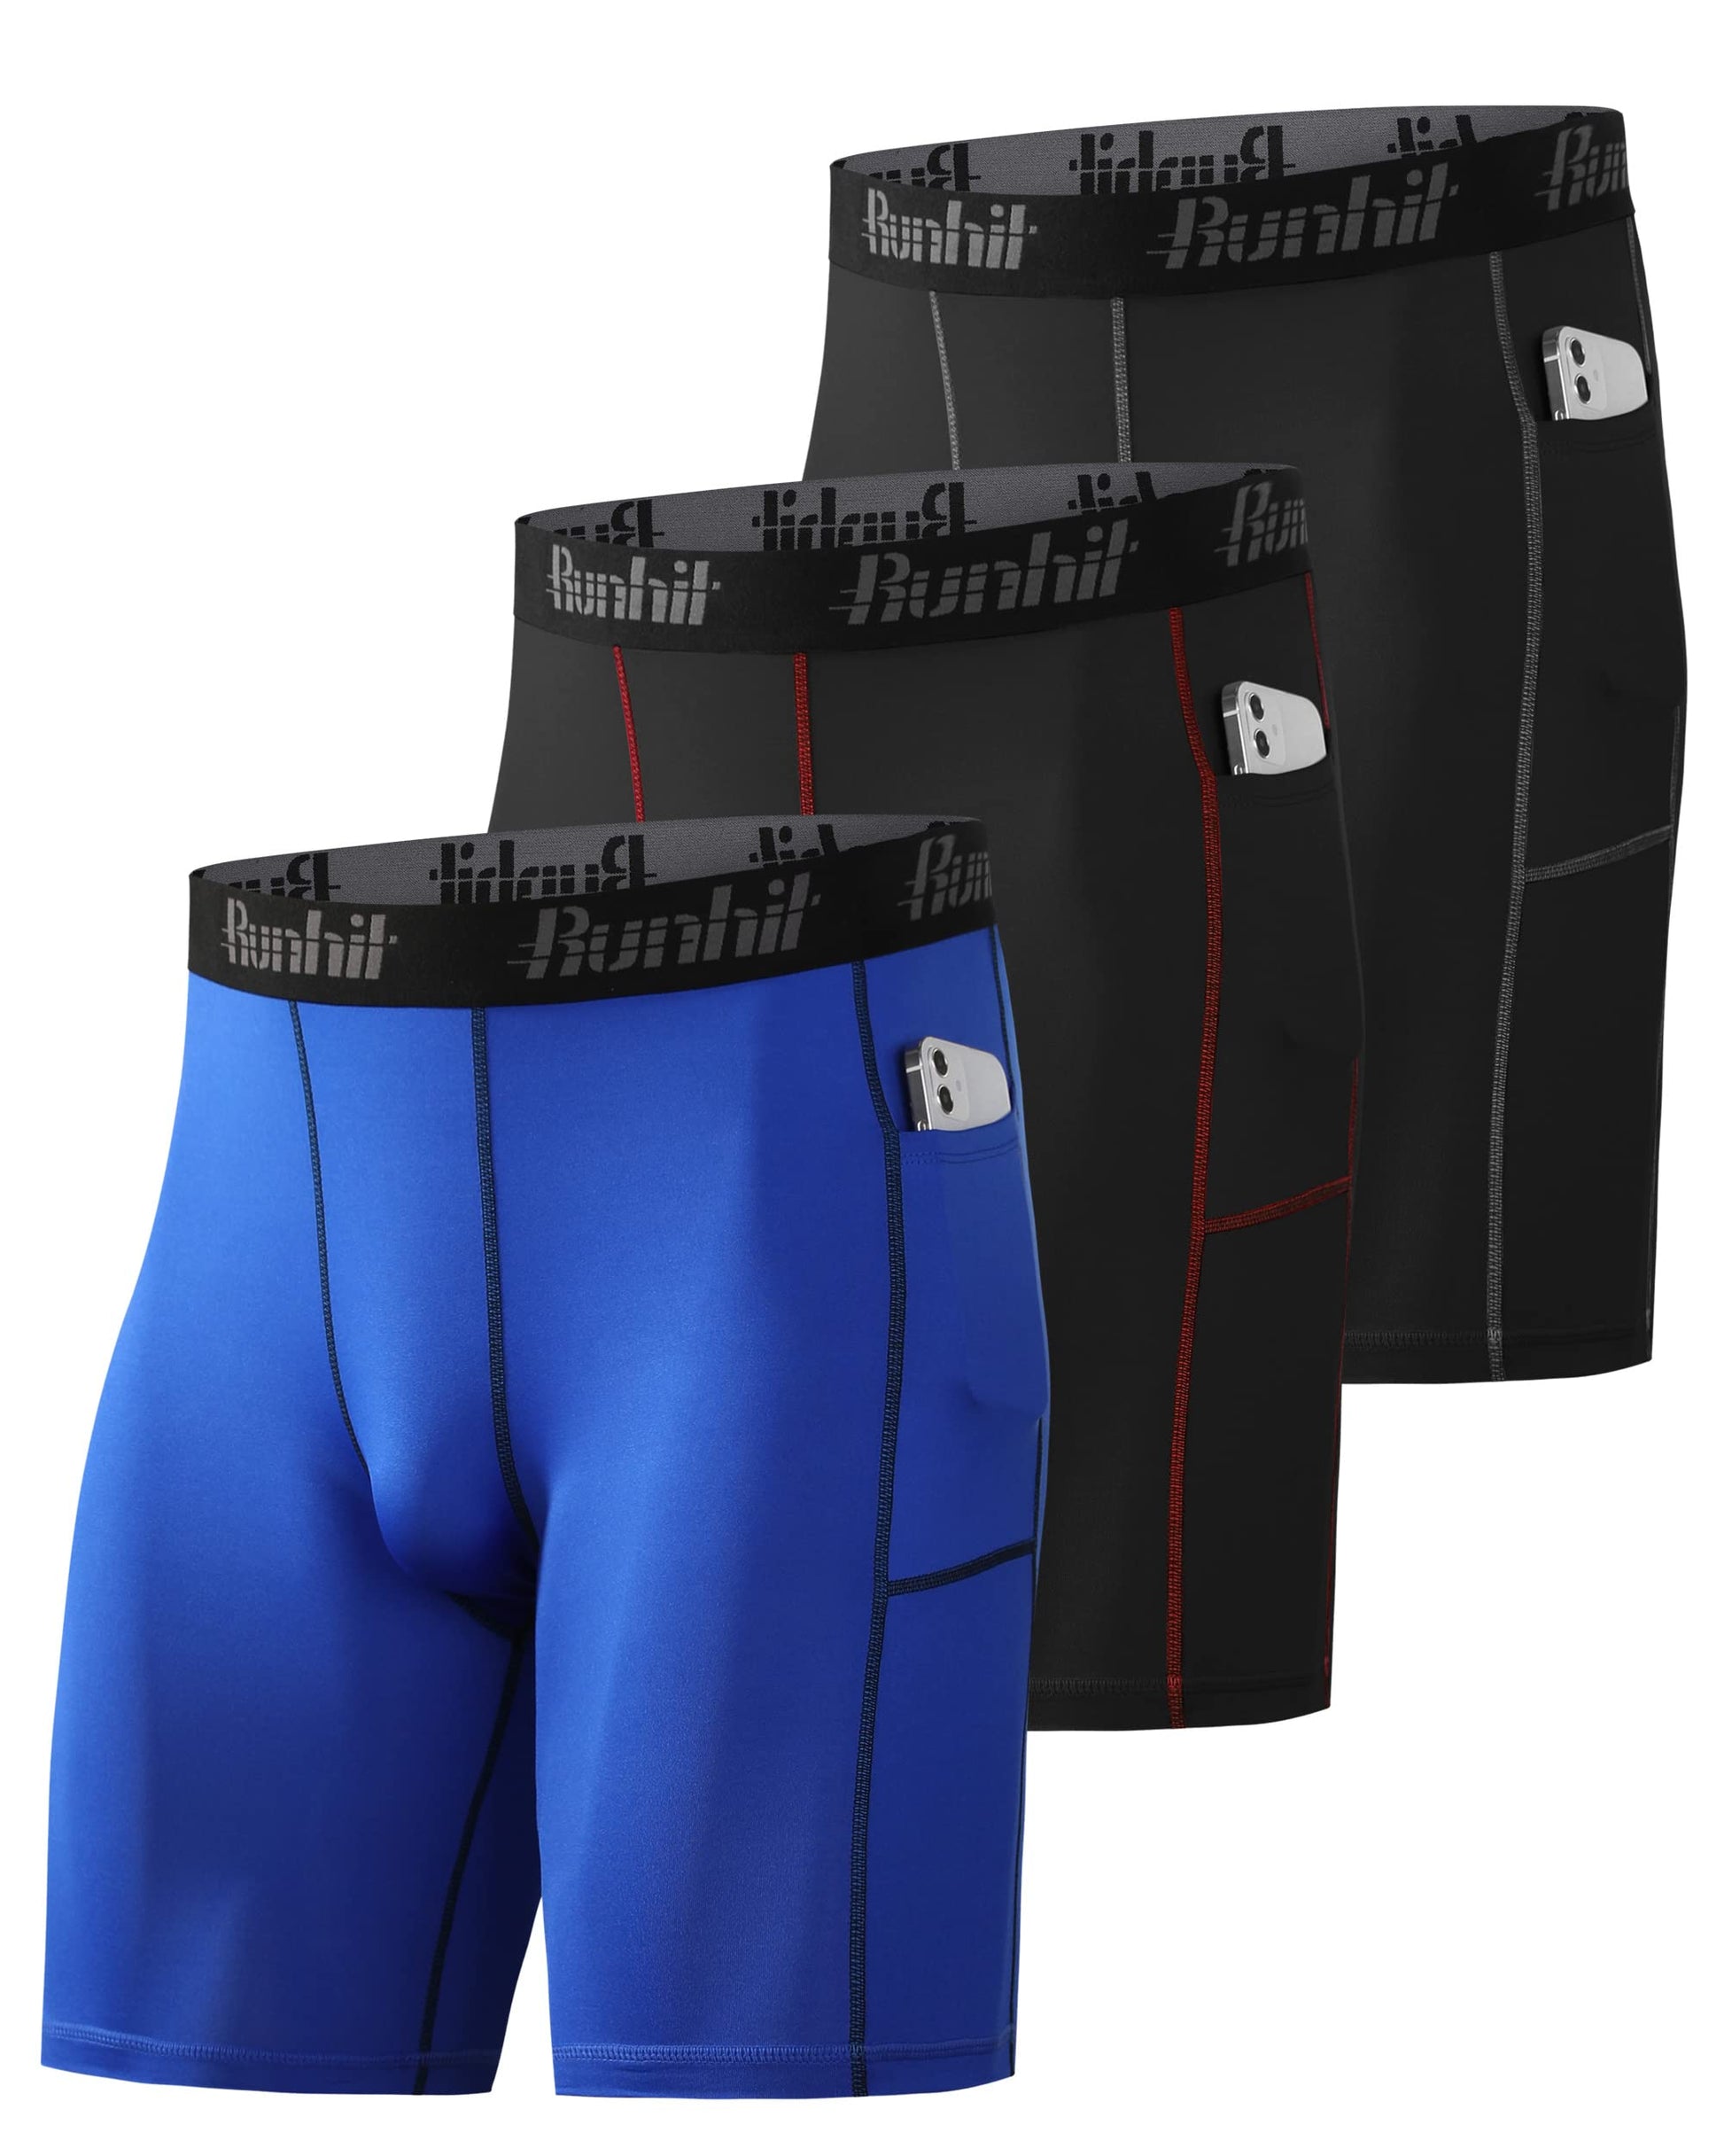 Runhit Men's Compression Shorts with Pockets(3 Pack),Tights Spandex Shorts - Opticdeals